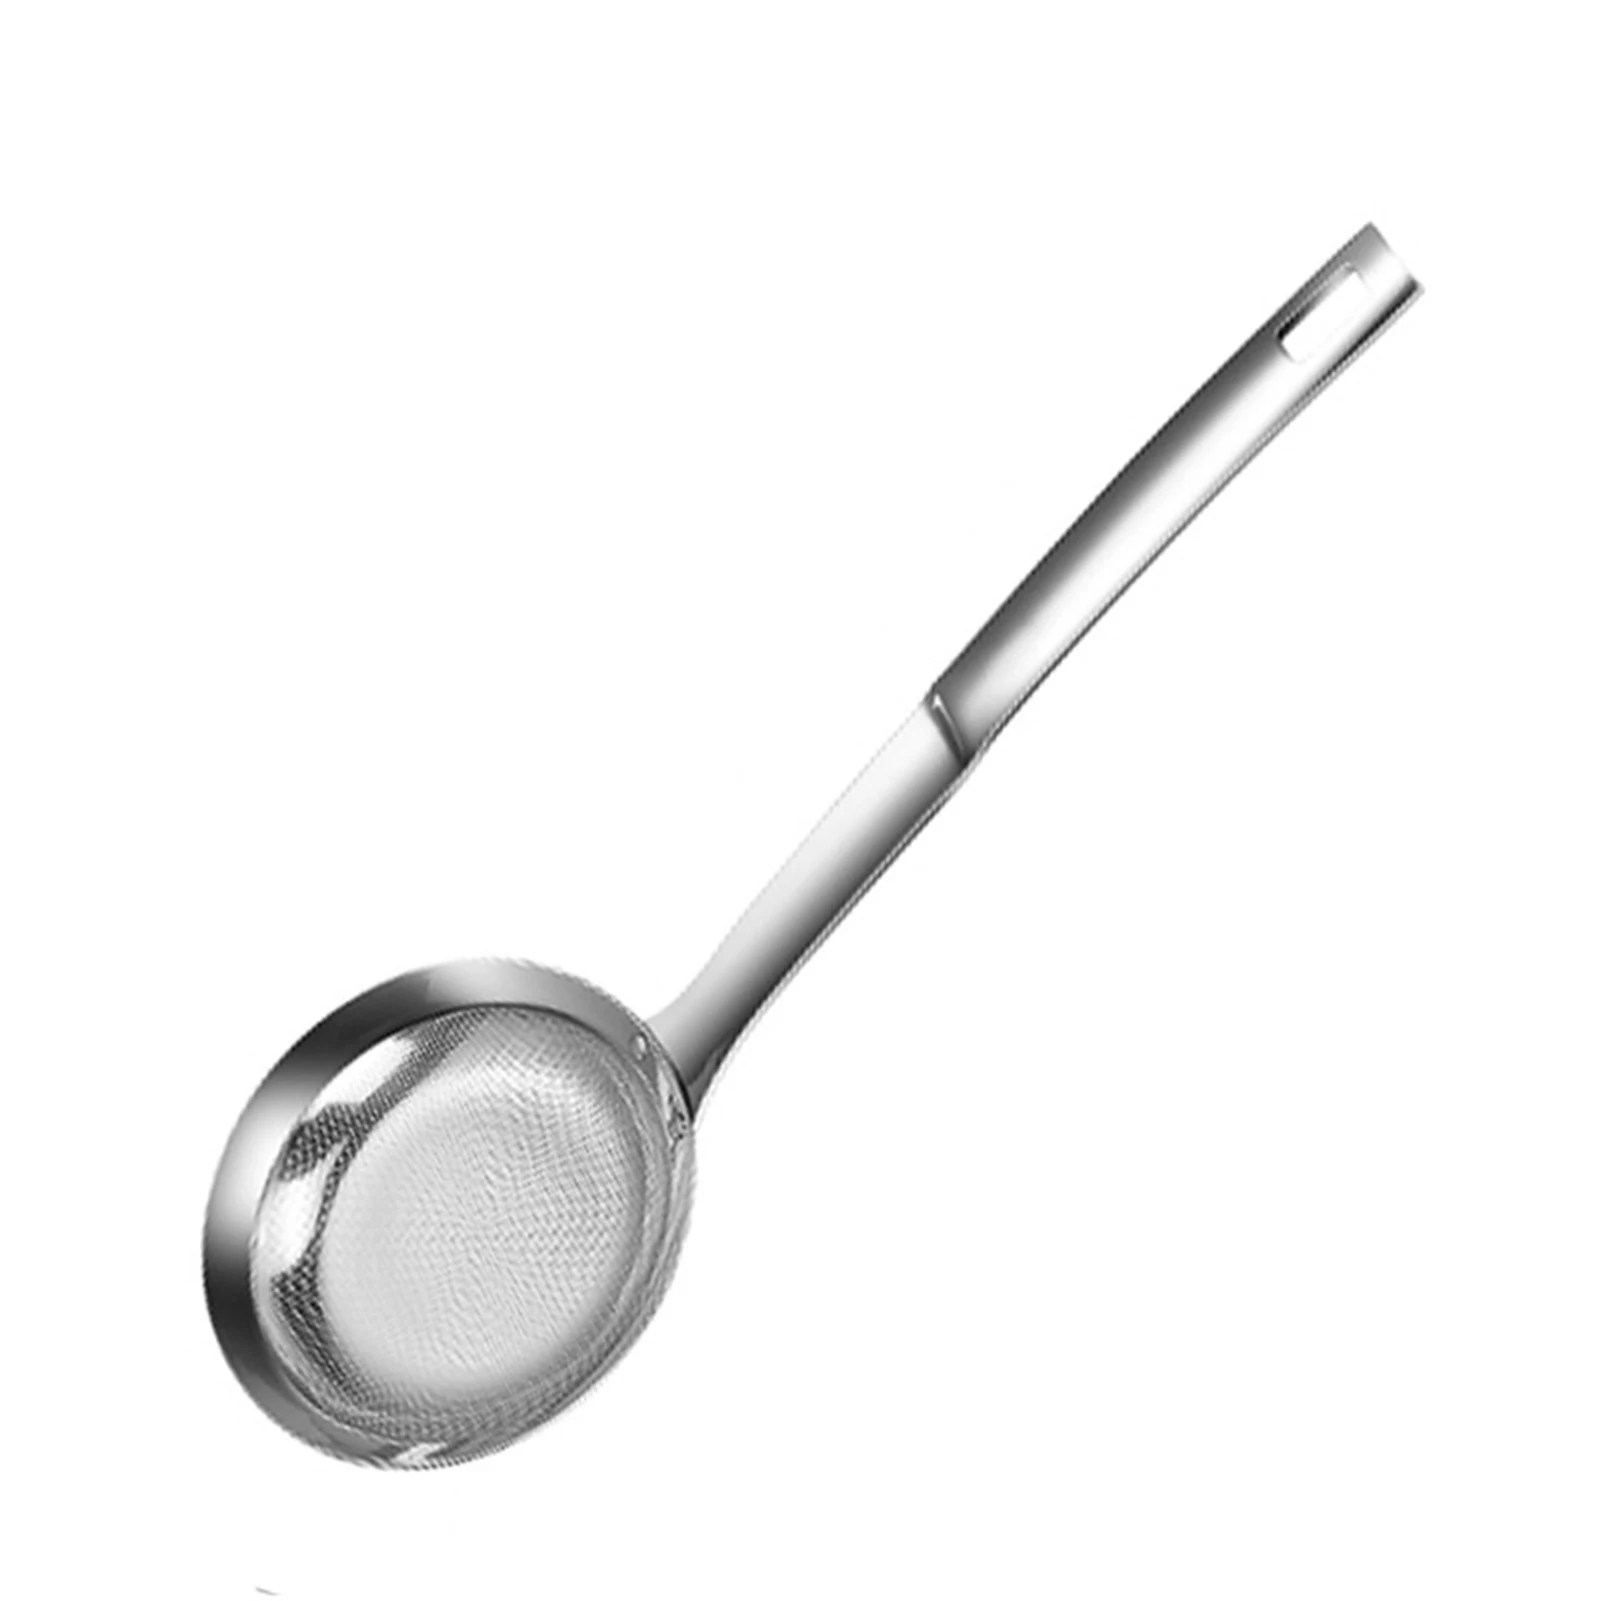 Stainless Steel Fine Mesh Skimmer Spoon Food Strainer with Long Handle Kitchen Tools for Skimming Grease and Foam Home images - 6